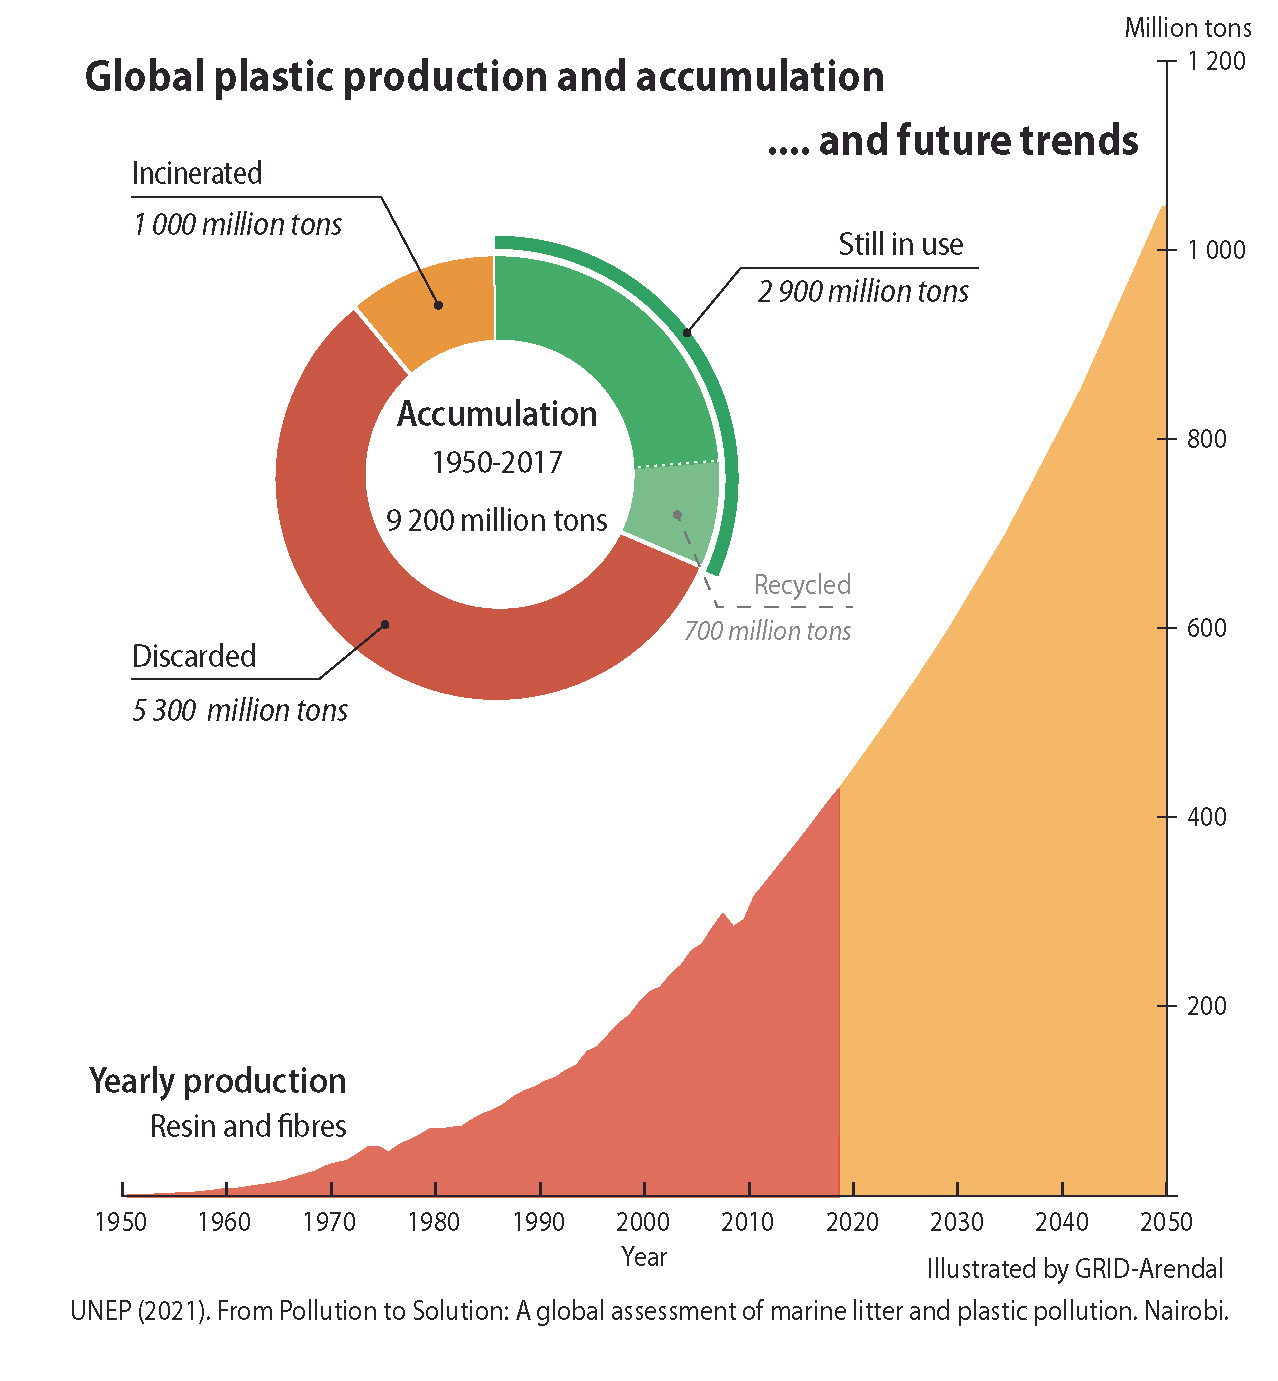 Global plastic production, accumulation and future trends | GRID-Arendal